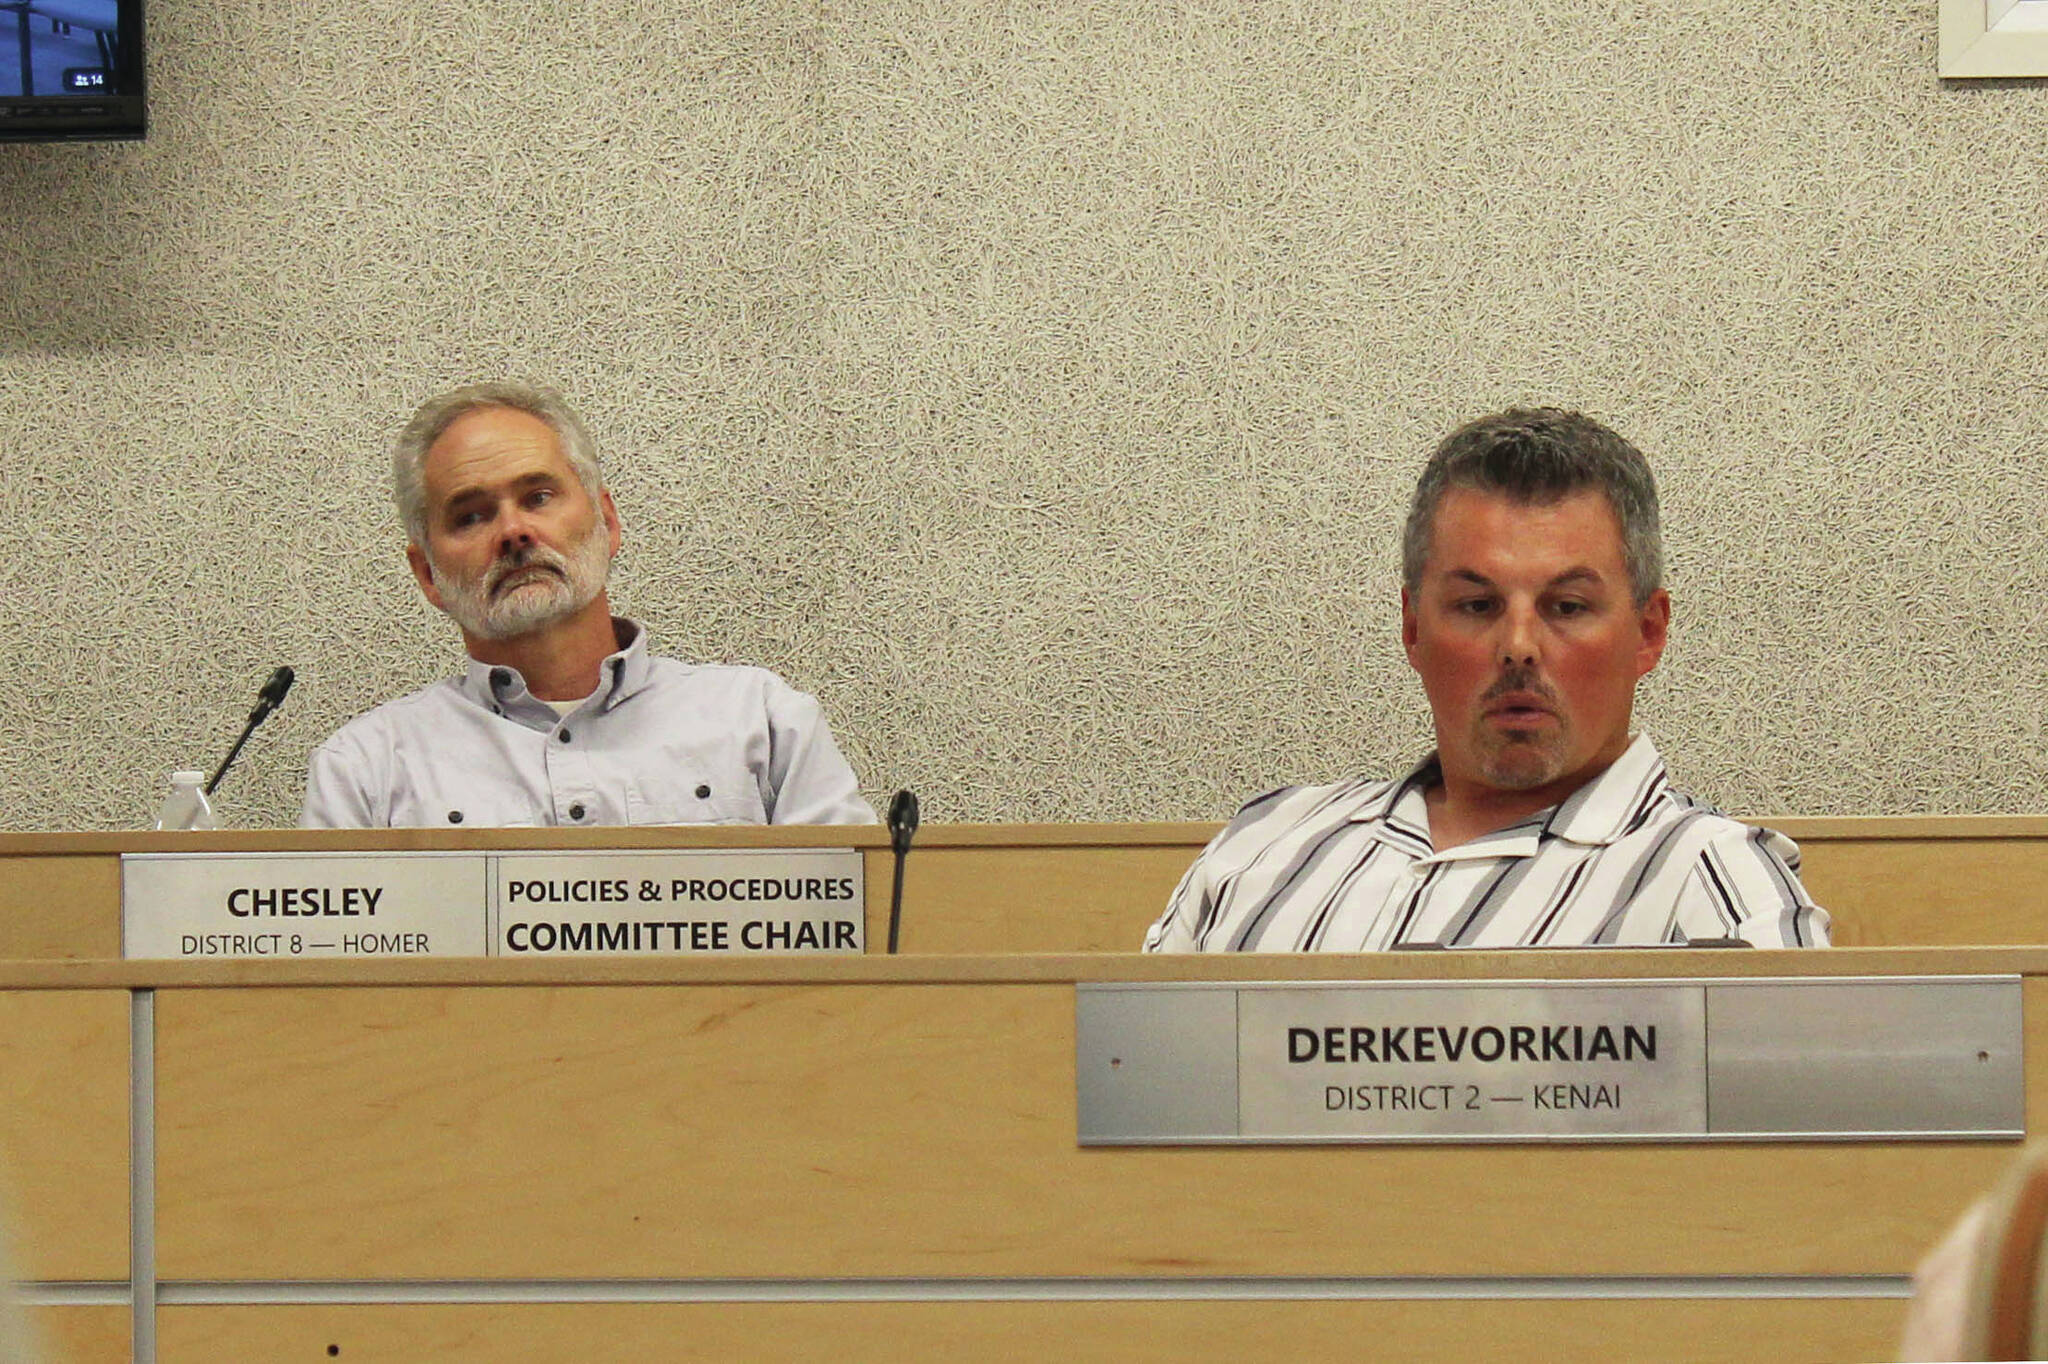 Assembly members Lane Chesley, left, and Richard Derkevorkian participate in a borough assembly meeting on Tuesday, Aug. 1, 2023, in Soldotna, Alaska. (Ashlyn O’Haara/Peninsula Clarion)